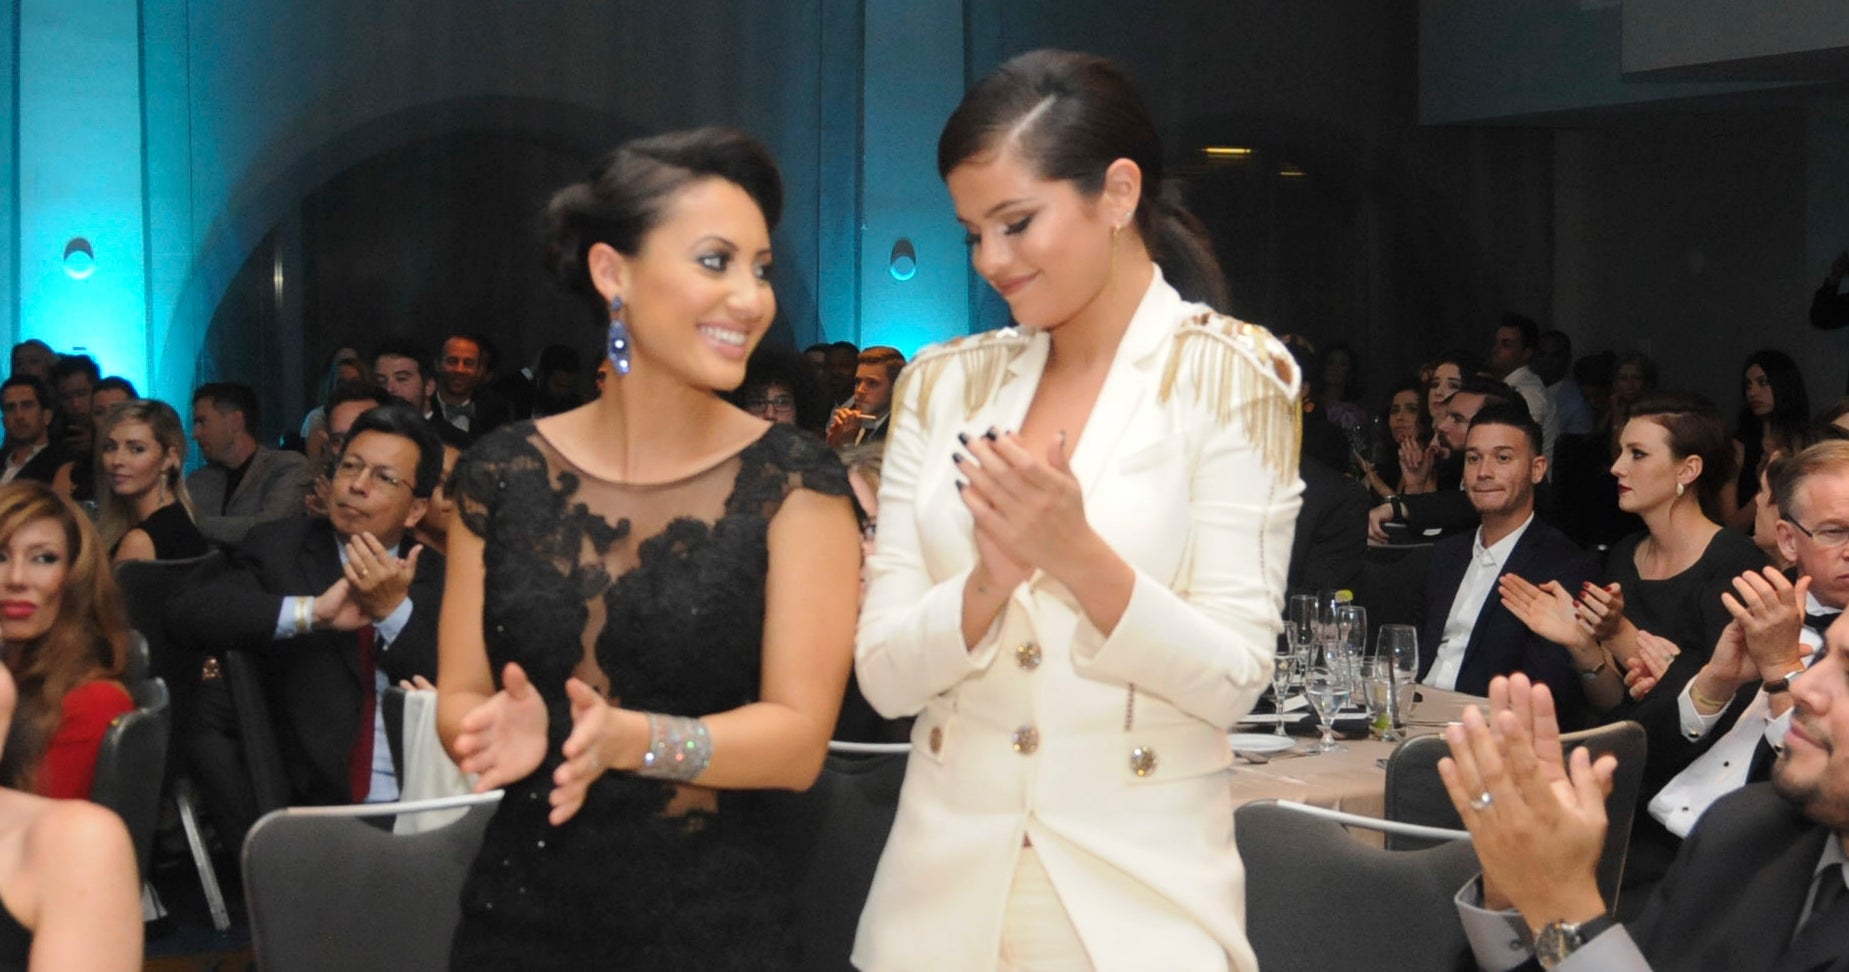 Francia and Selena at an event in 2014